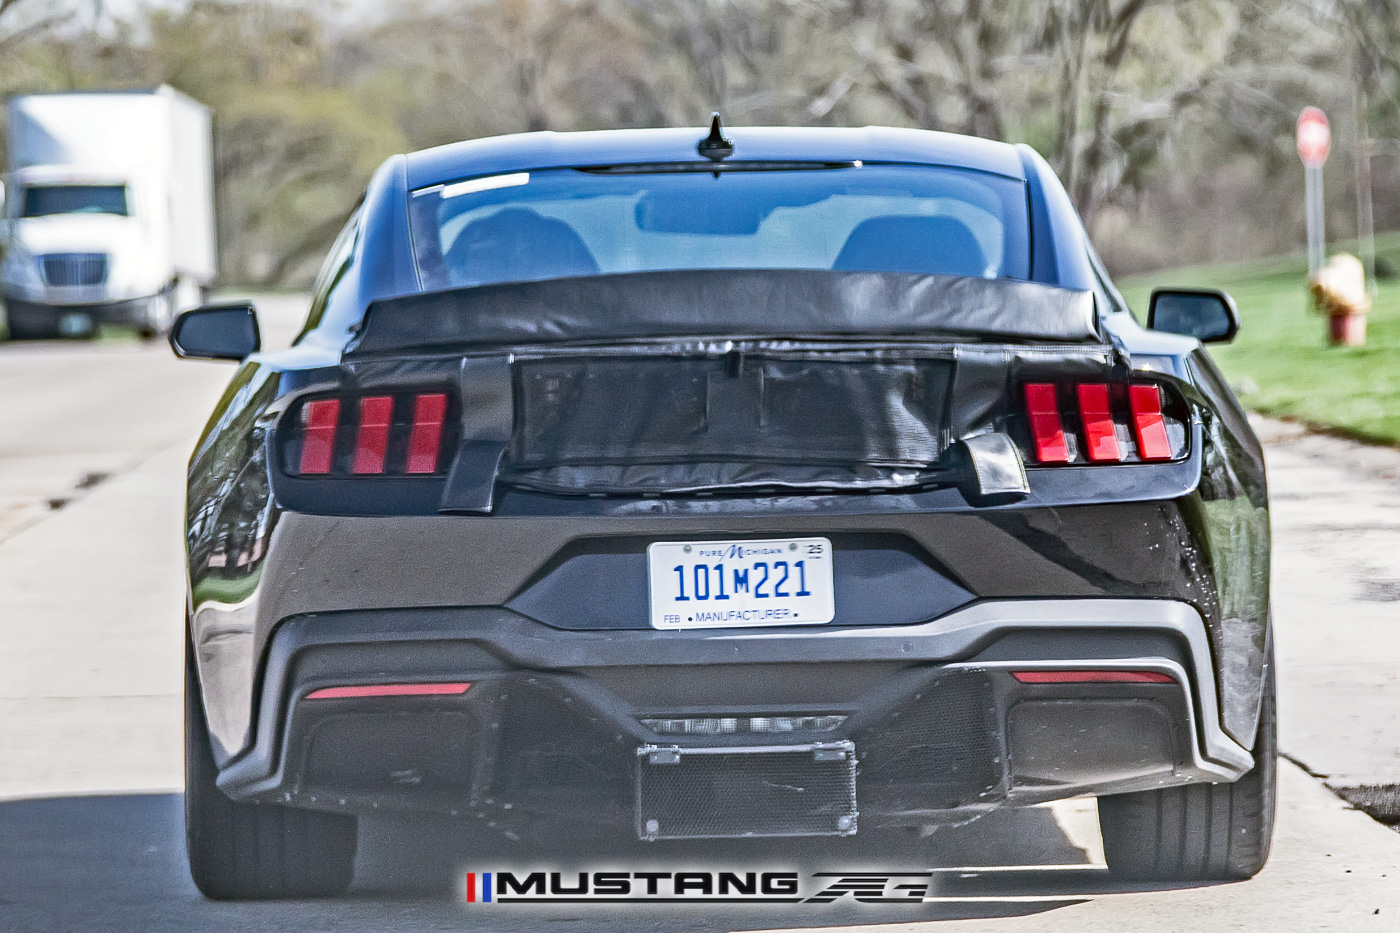 S650 Mustang 📸 Mustang GT3 Road-Version Prototype Spied Testing with Center-Exit Exhaust s650-mustang-variant-prototype-center-exit-exhaust-17